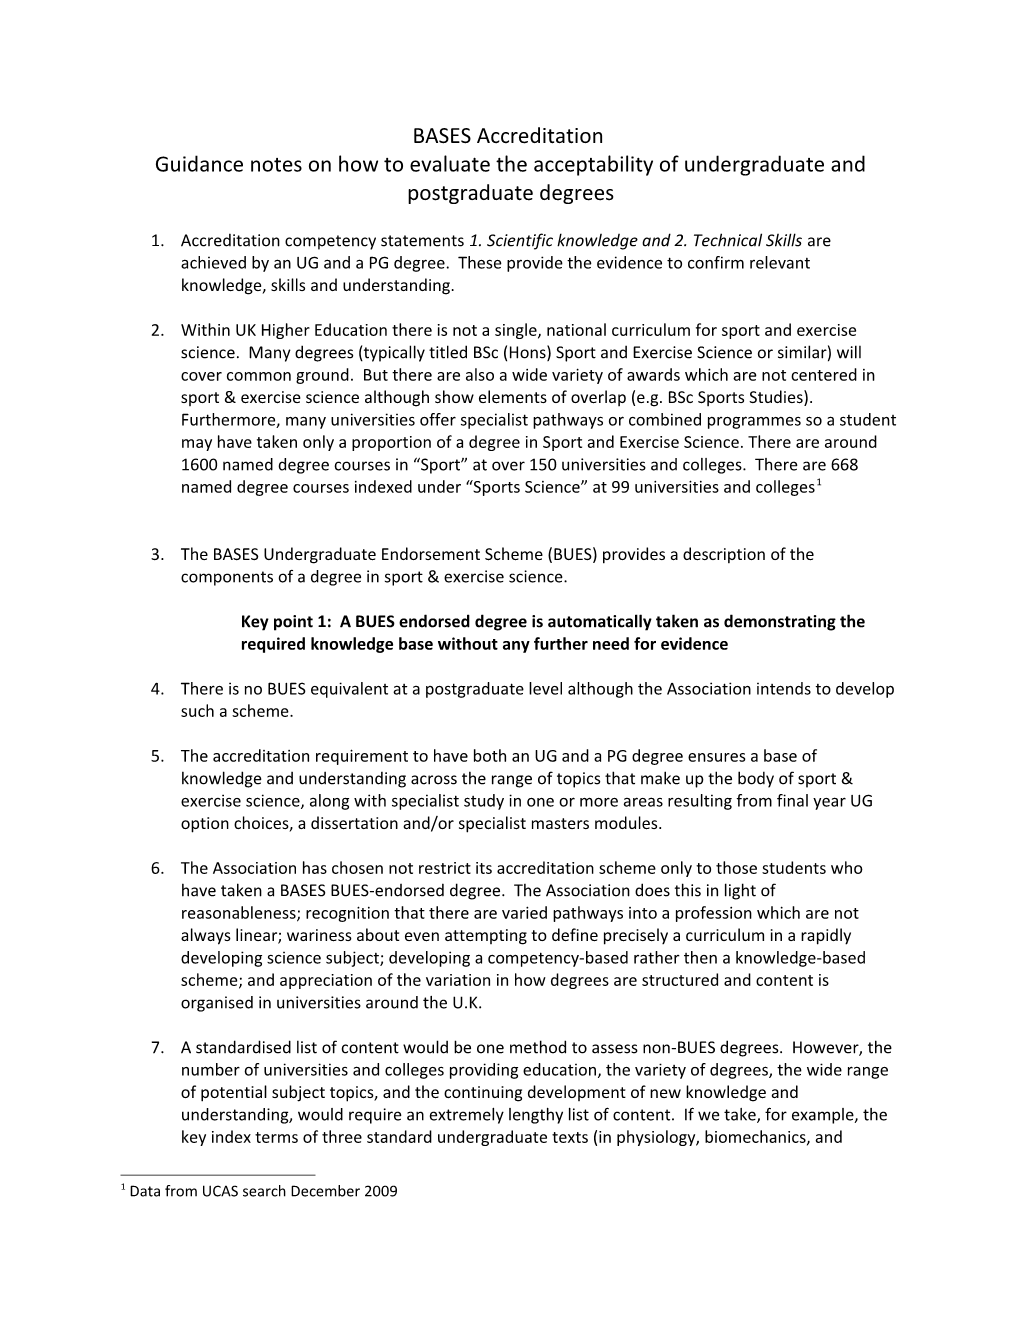 Guidance Notes on How to Evaluate the Acceptability of Undergraduate and Postgraduate Degrees